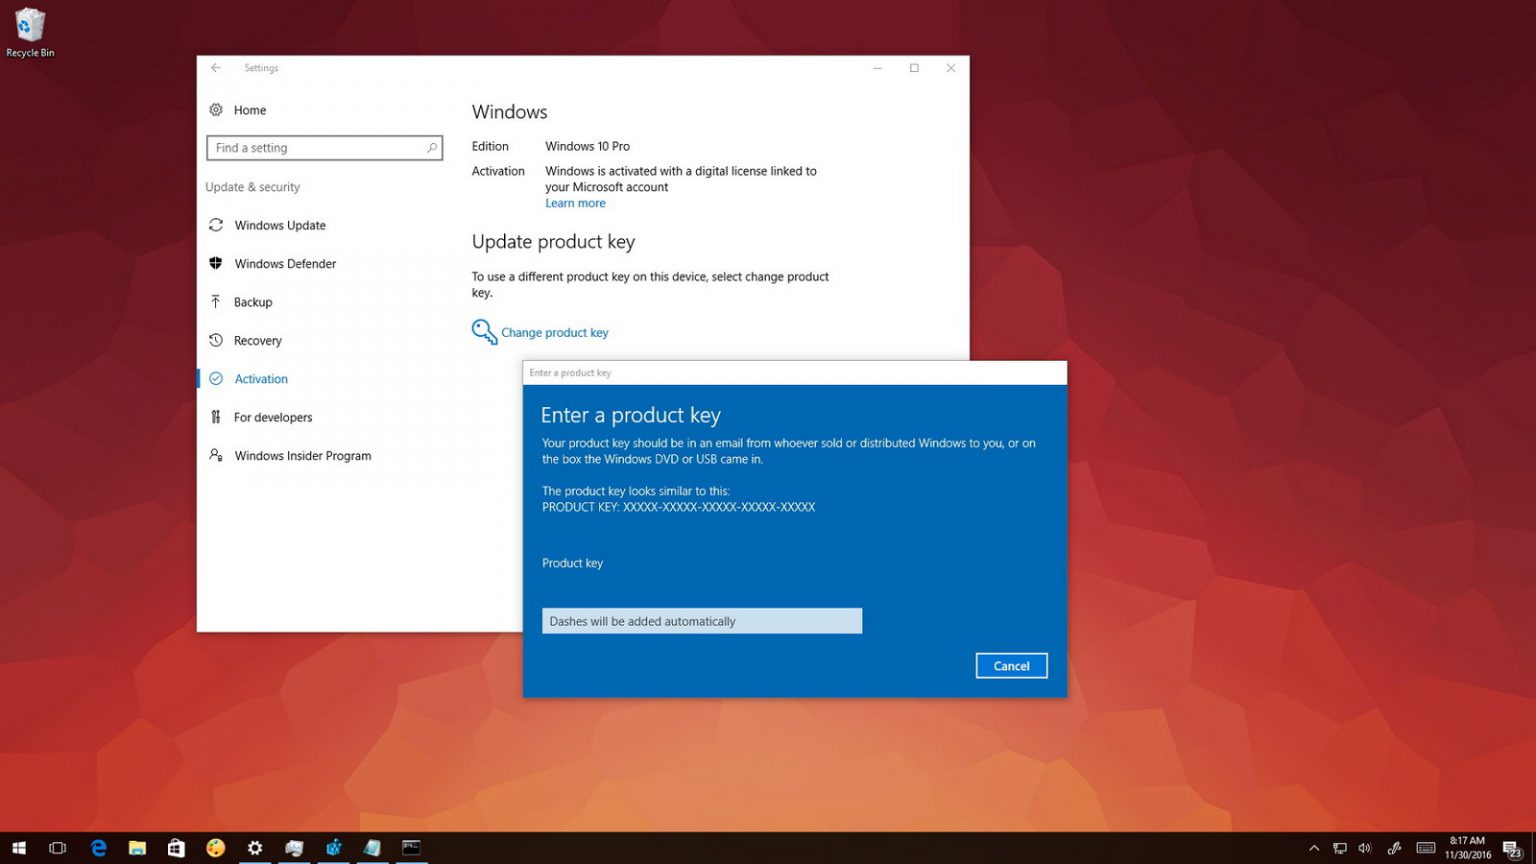 windows 10 pro free product key for activation